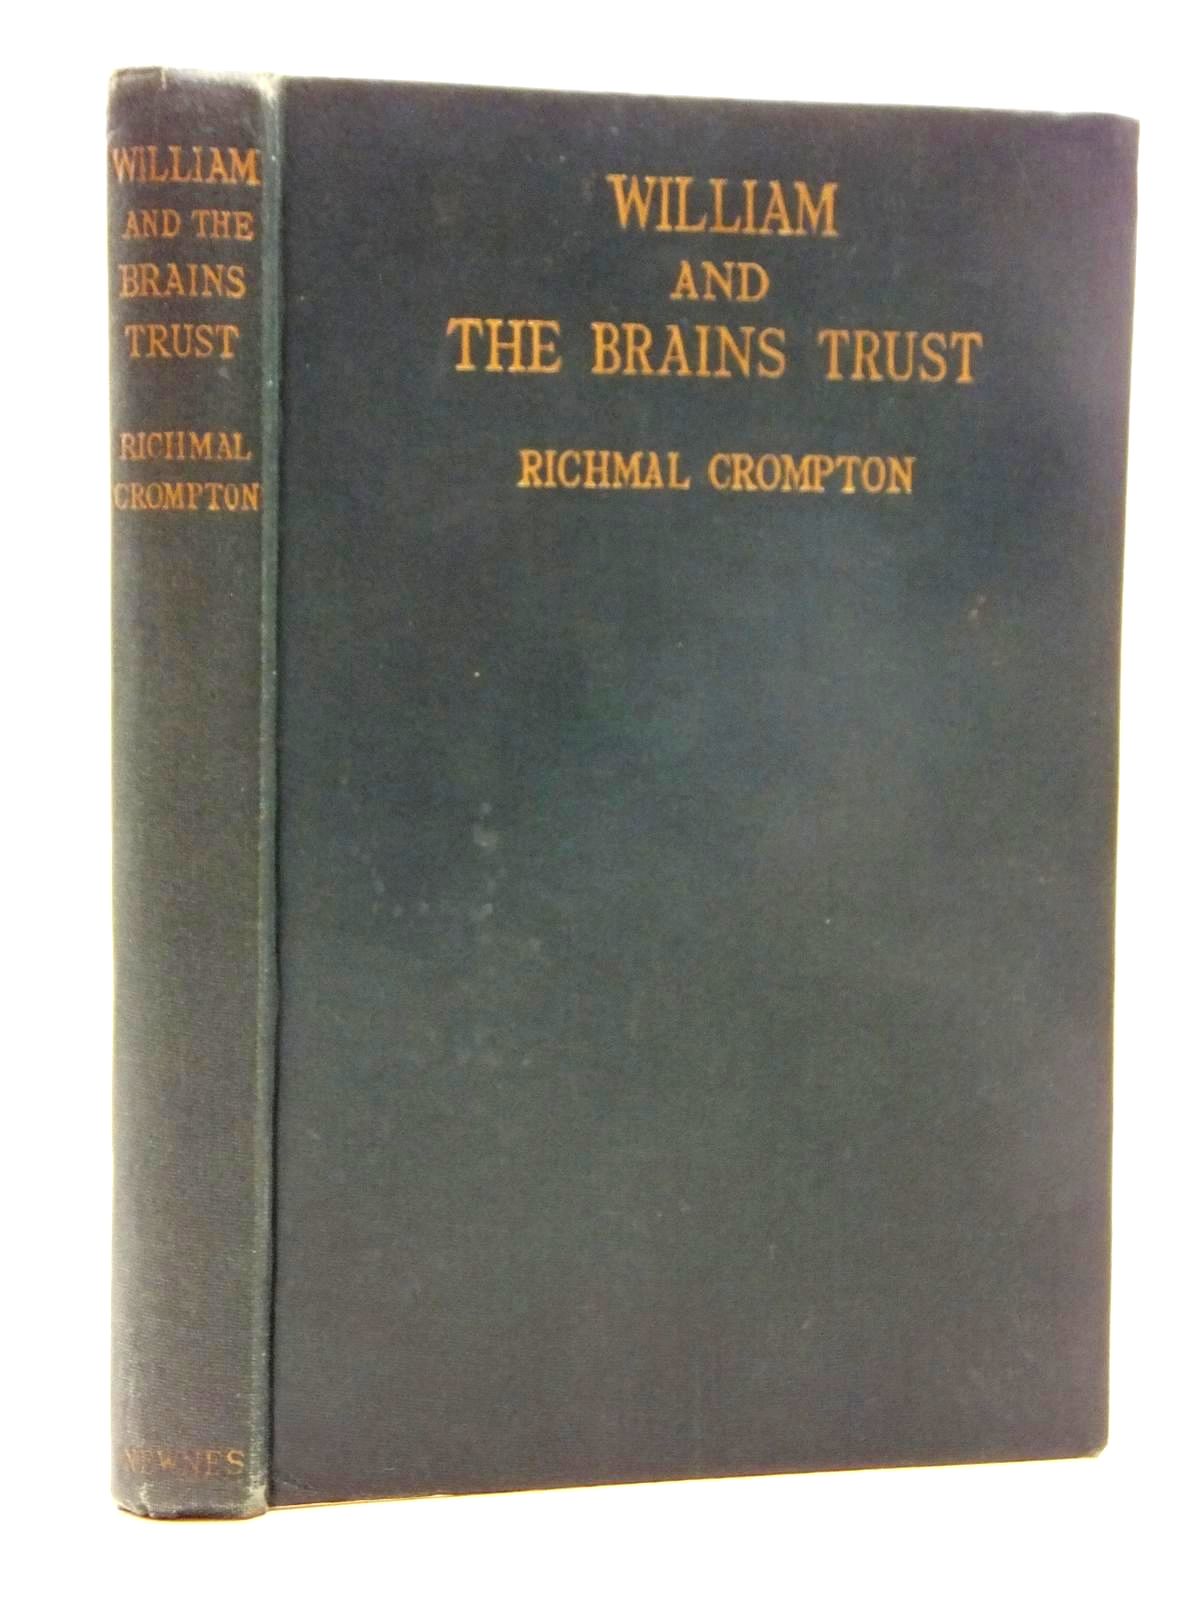 Photo of WILLIAM AND THE BRAINS TRUST written by Crompton, Richmal illustrated by Henry, Thomas published by George Newnes Ltd. (STOCK CODE: 1317055)  for sale by Stella & Rose's Books